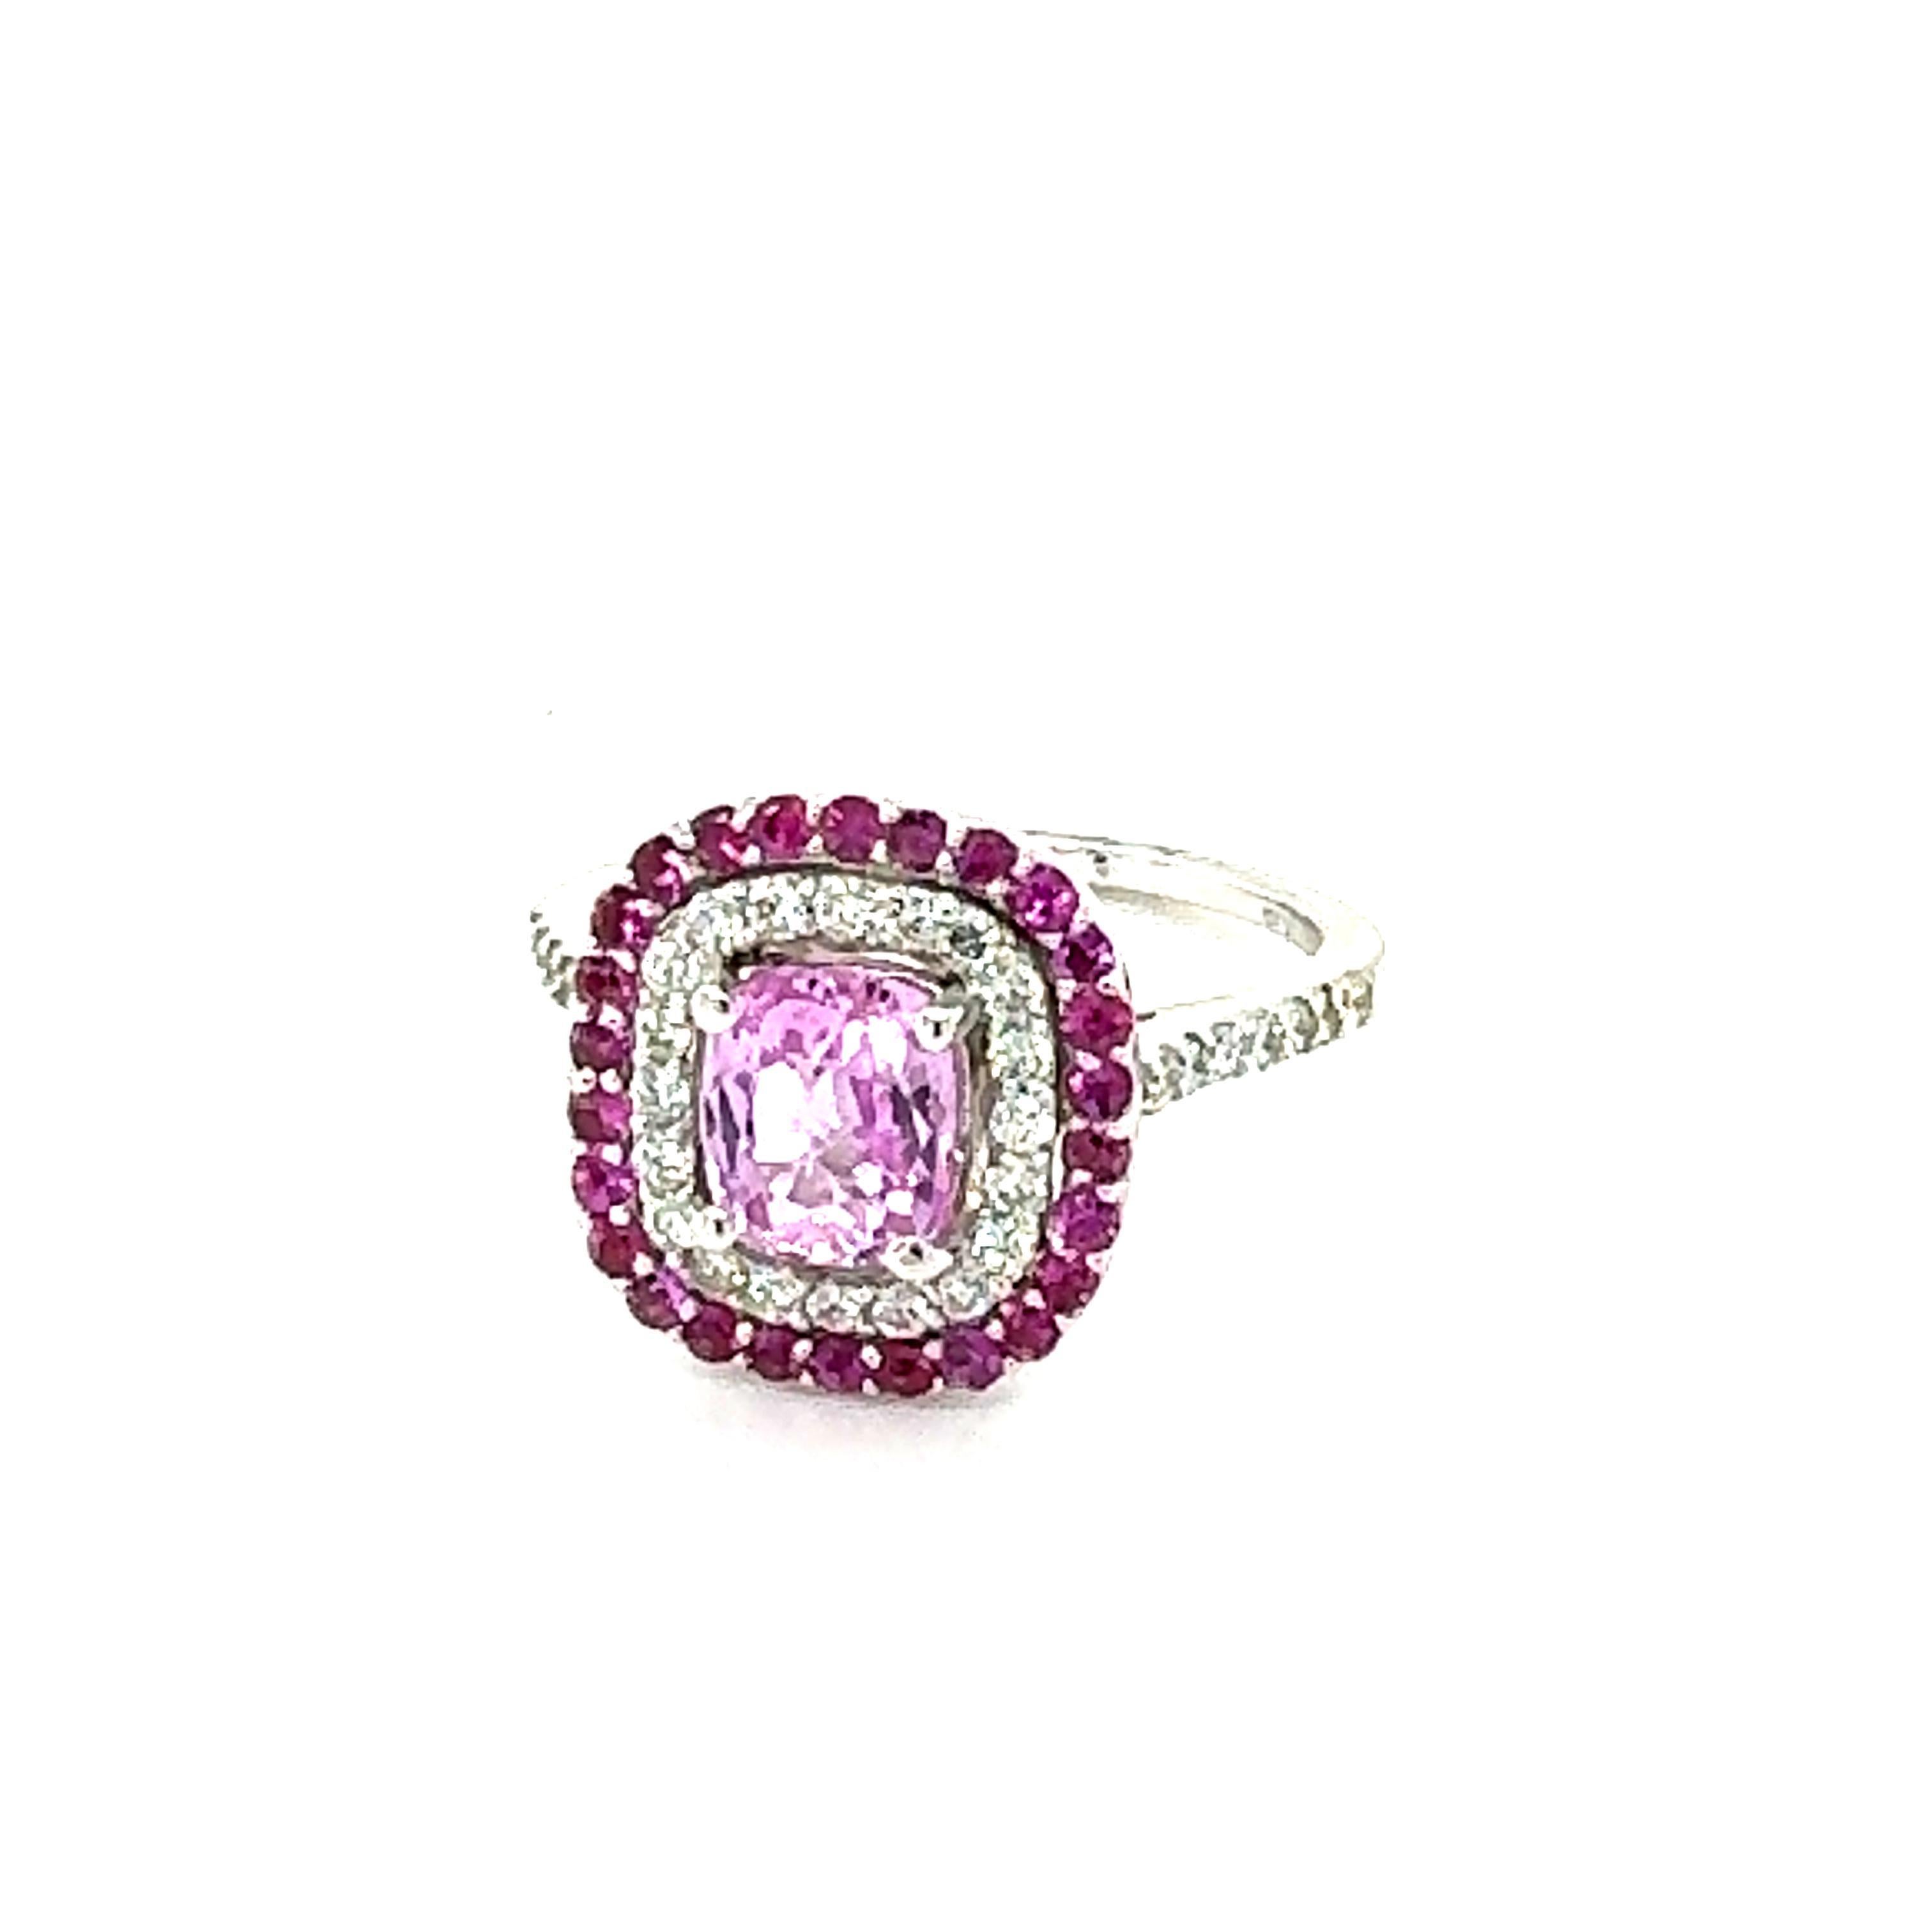 GIA Certified 2.32 Carat Cushion Cut Pink Sapphire Diamond White Gold Ring In New Condition For Sale In Los Angeles, CA